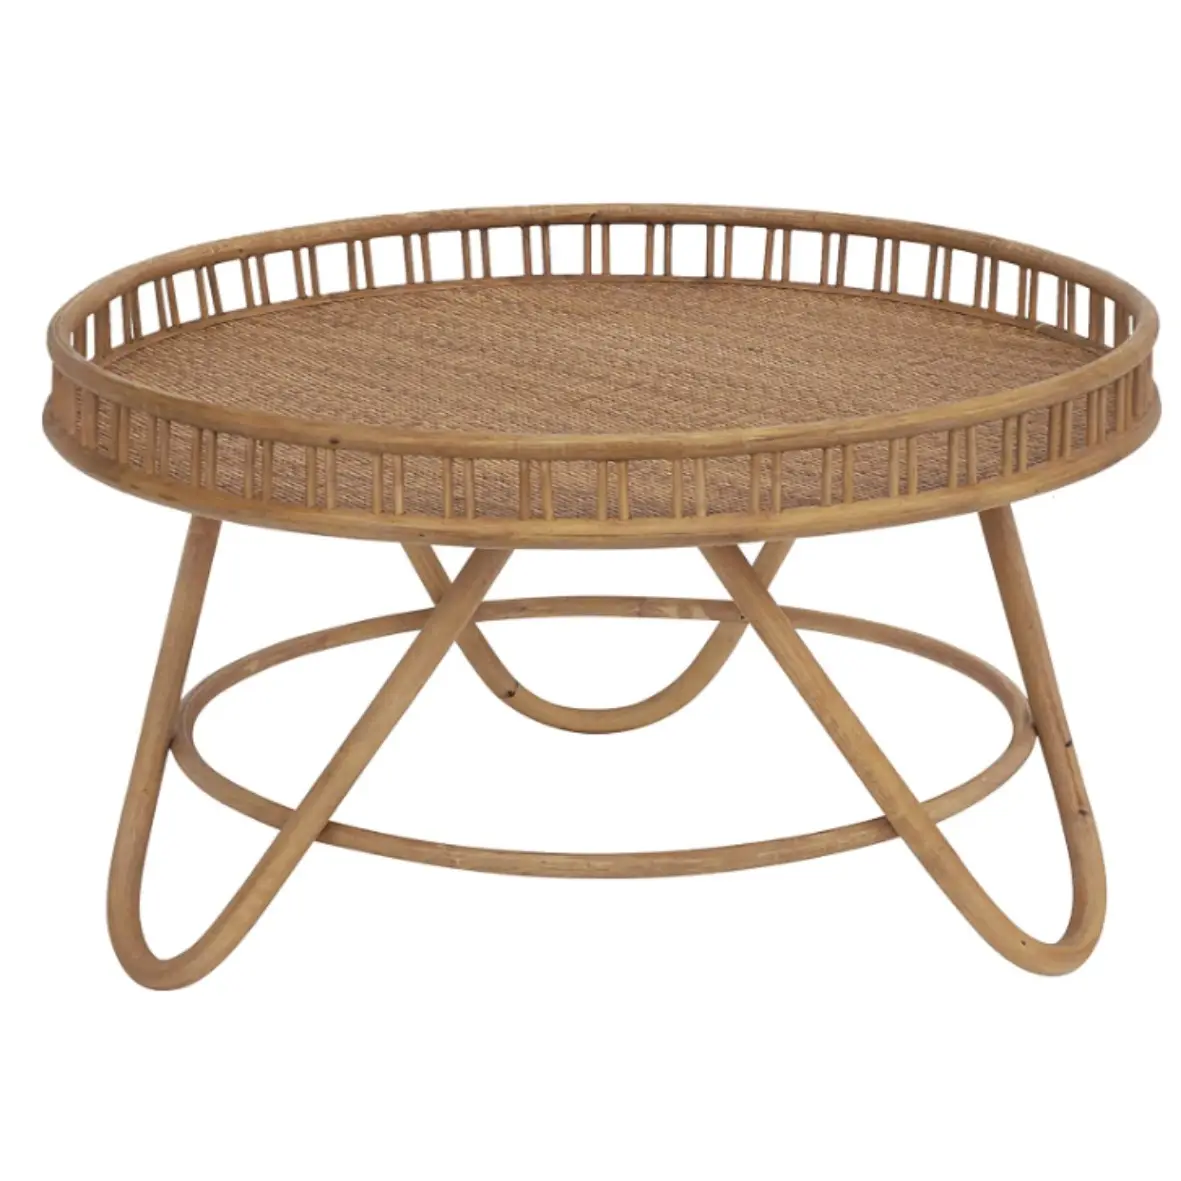 New Arrival Modern Center Table Handcrafted Rattan Rounded Coffee Table With Bamboo Base For Home/Office Decorative Furniture